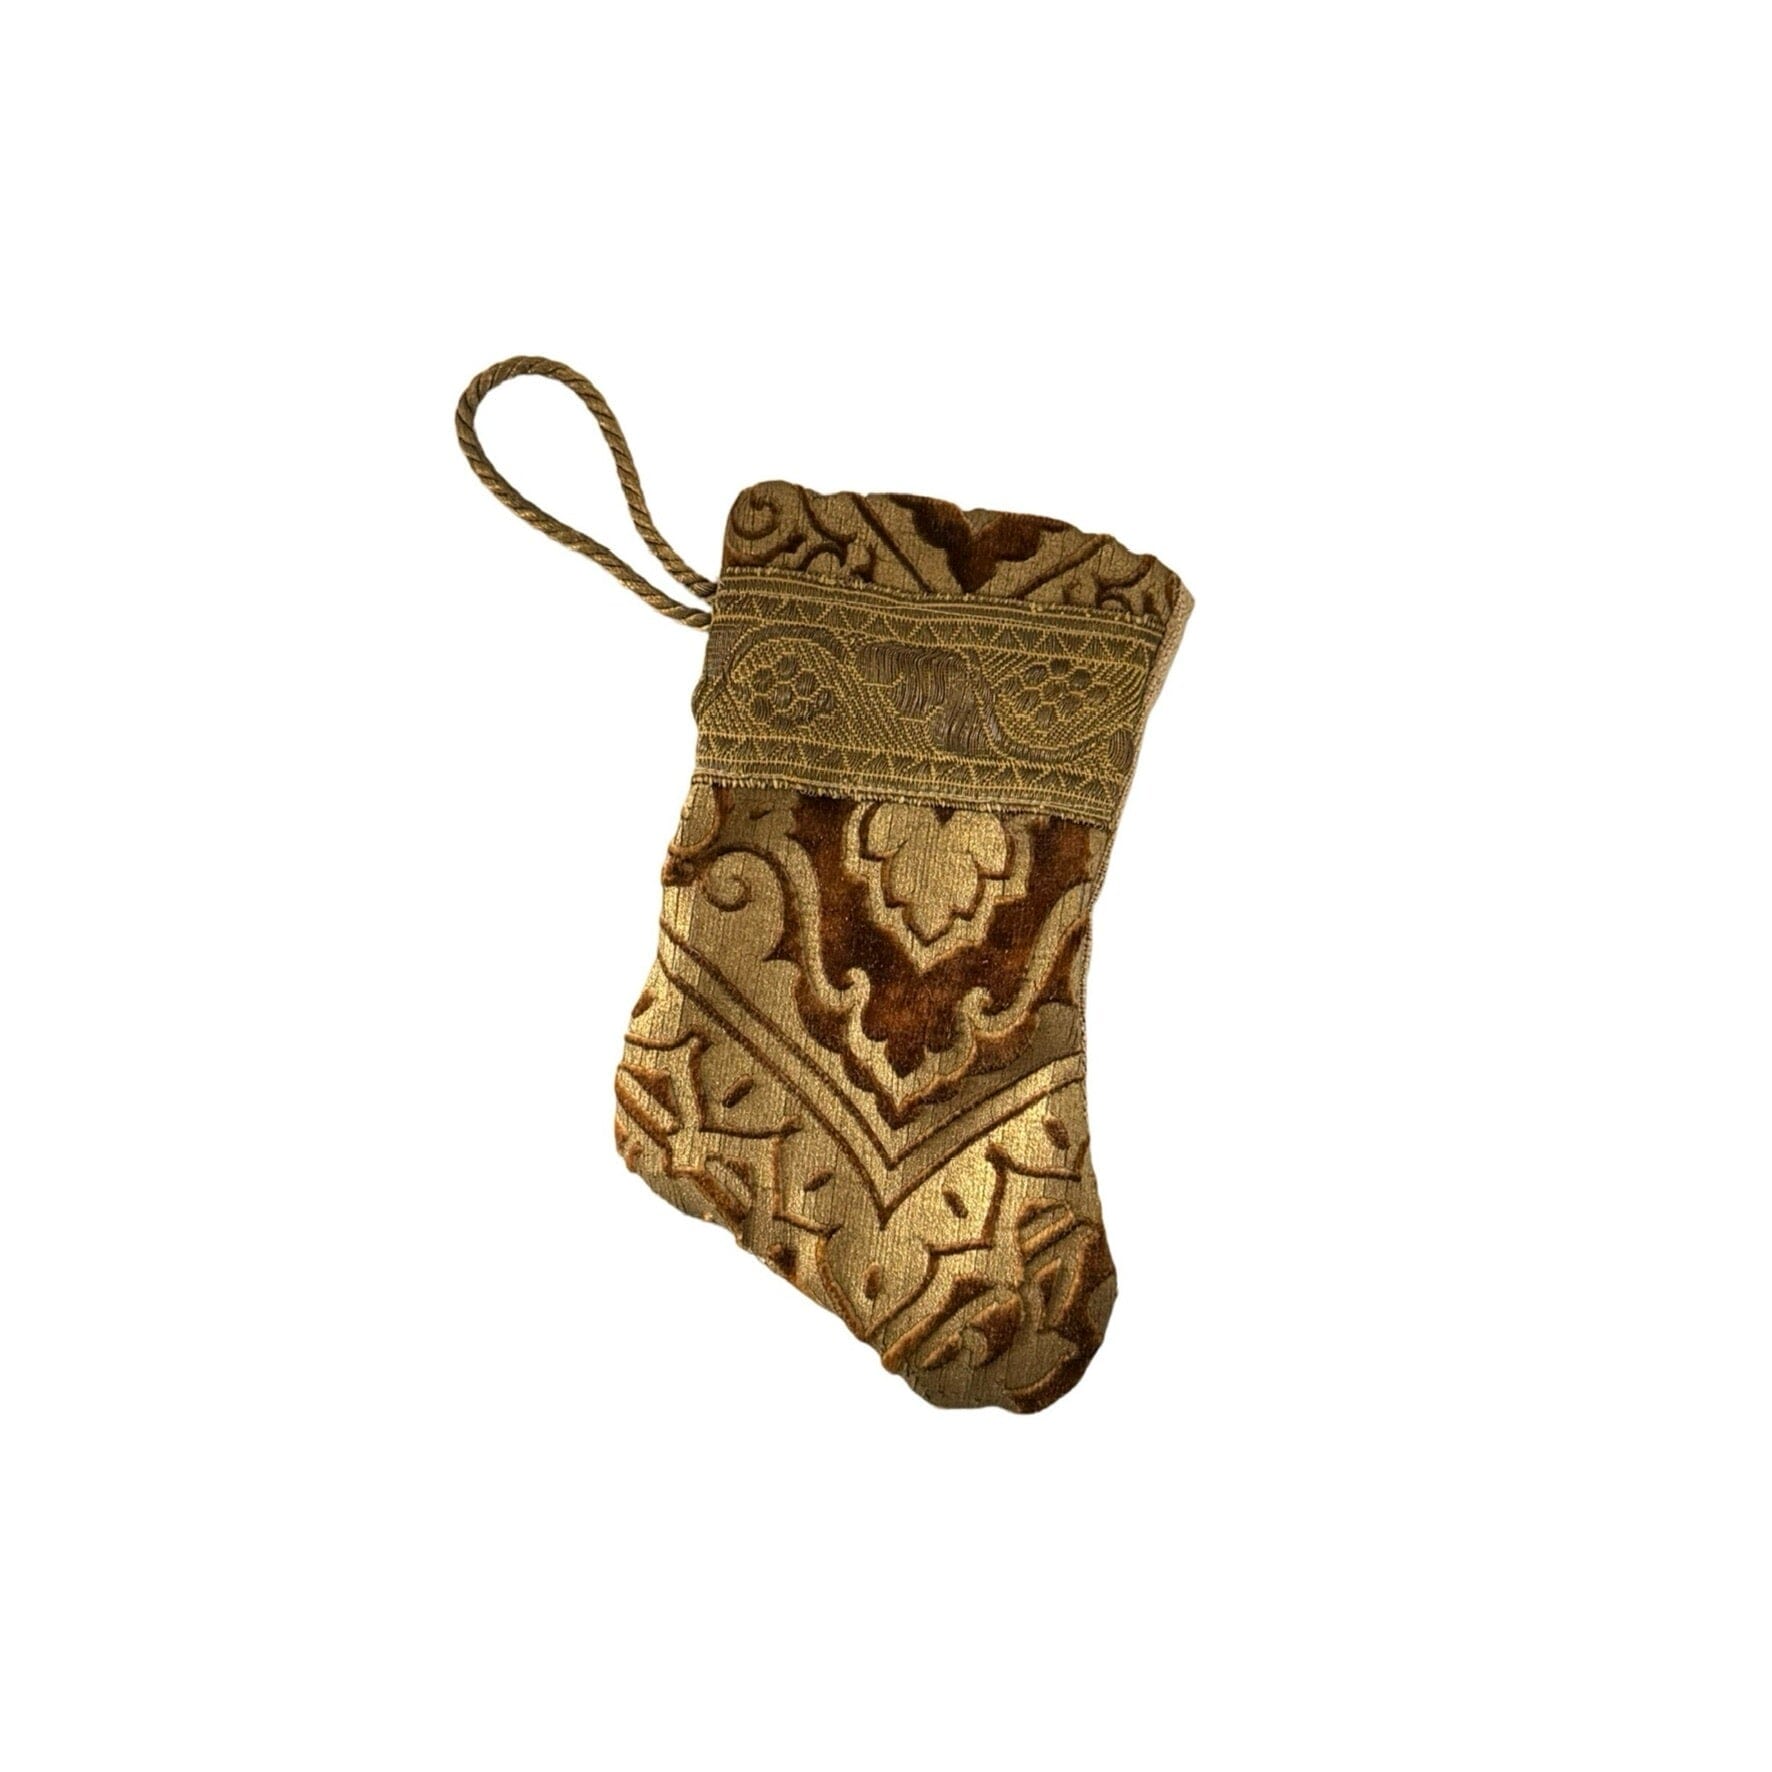 Handmade Mini Stocking Made From Vintage Fabric and Trims- Brown and Gold Ornament B. Viz Design G 